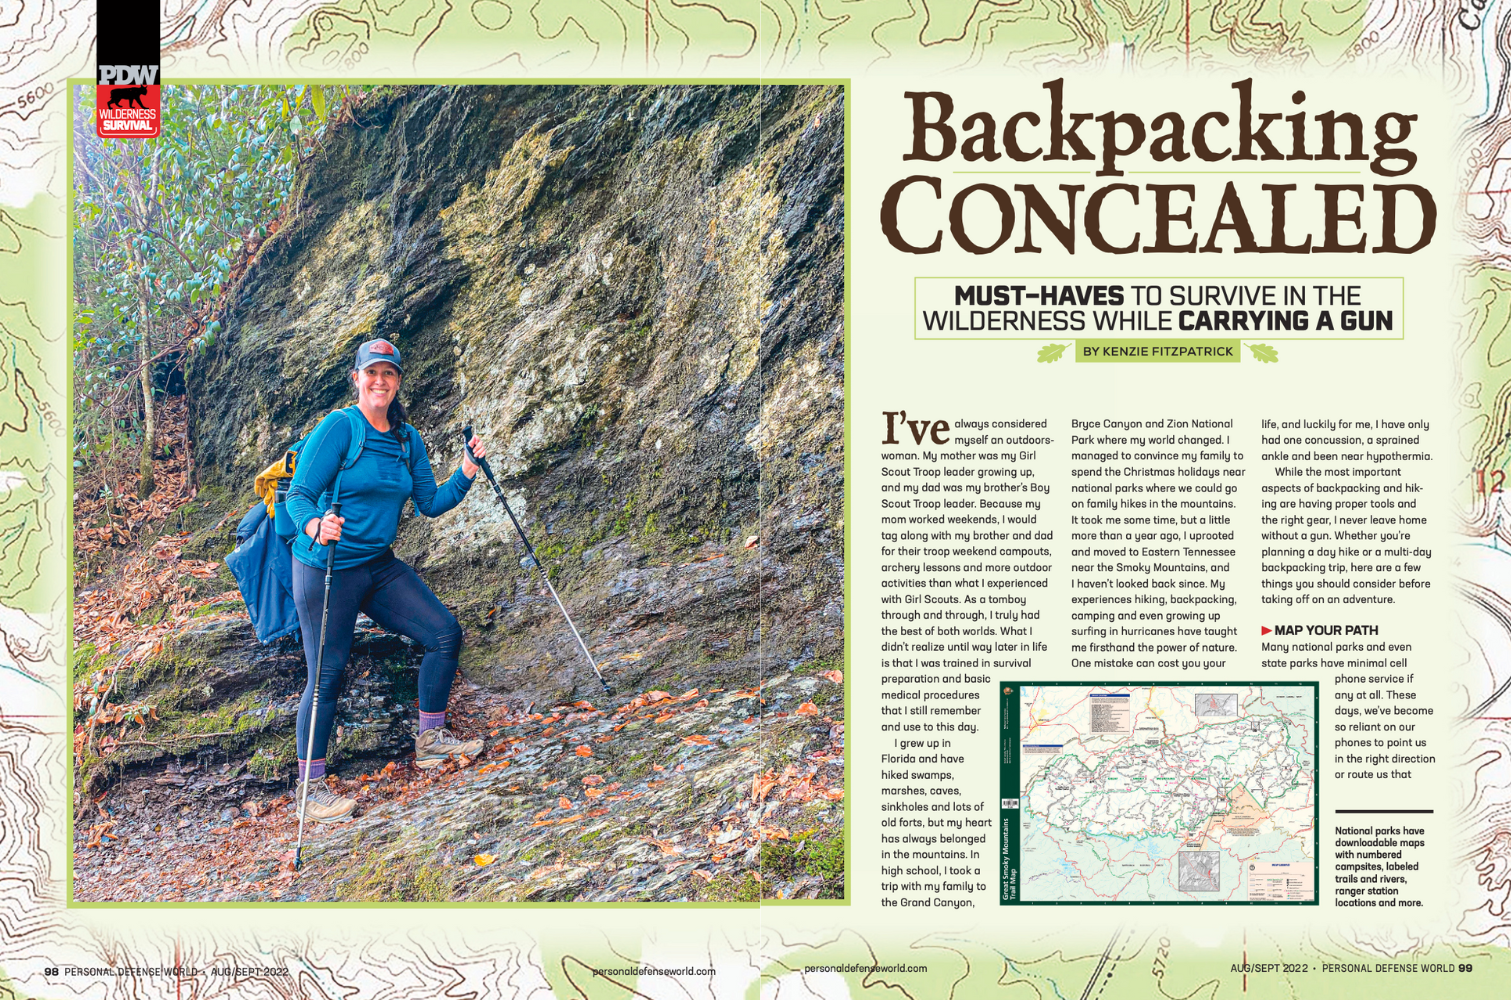 Backpacking Concealed: Must-Haves to Survive in the Wilderness While Carrying a Gun